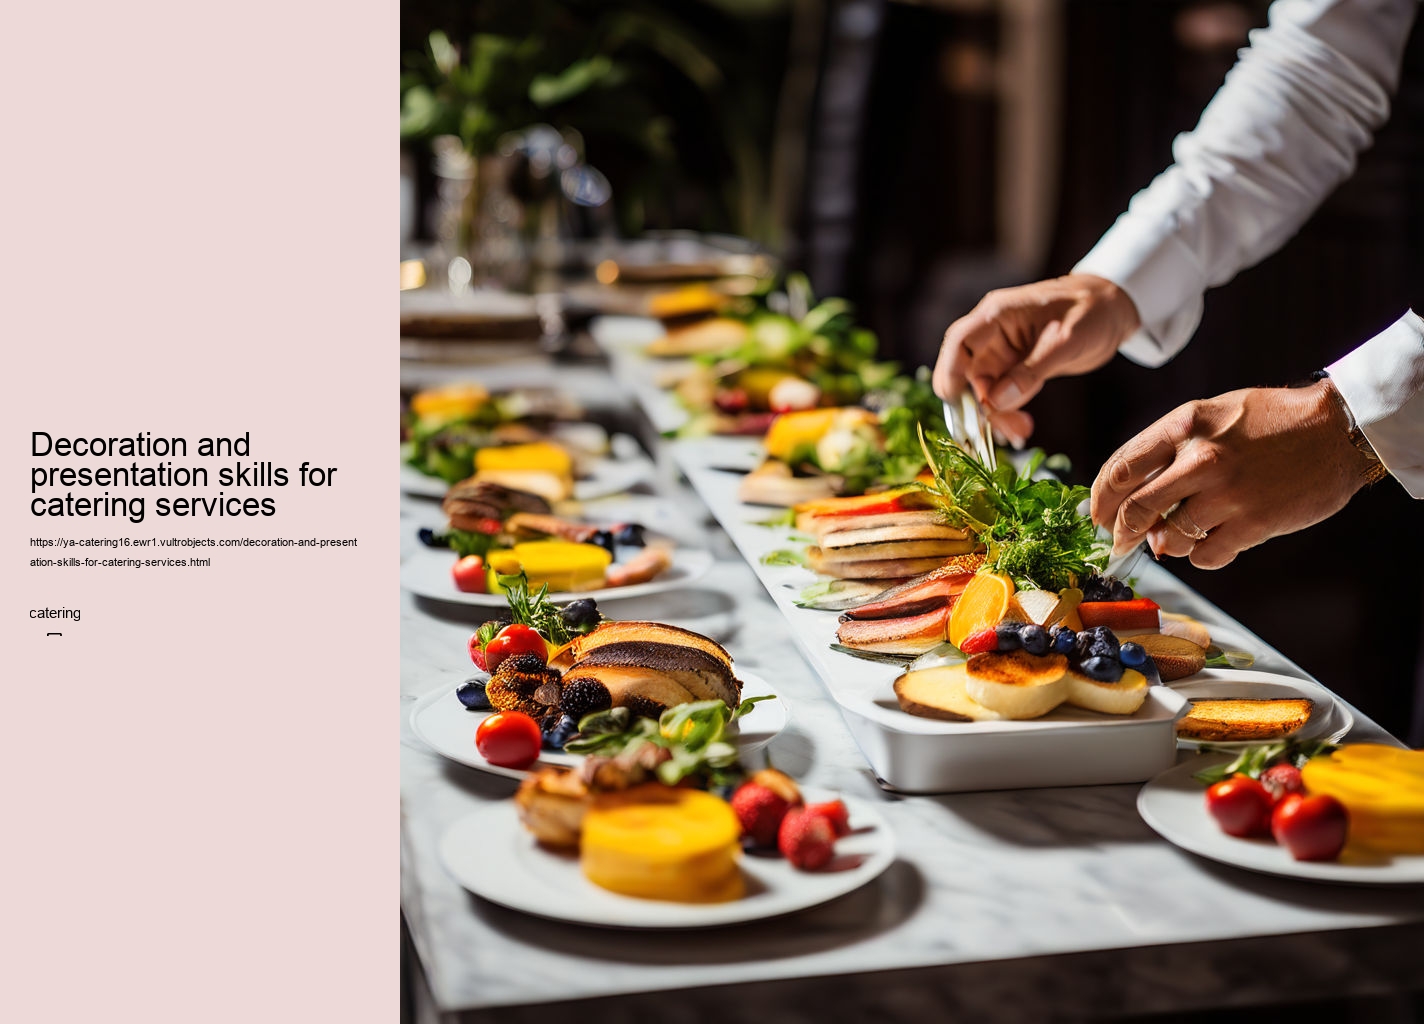 Decoration and presentation skills for catering services